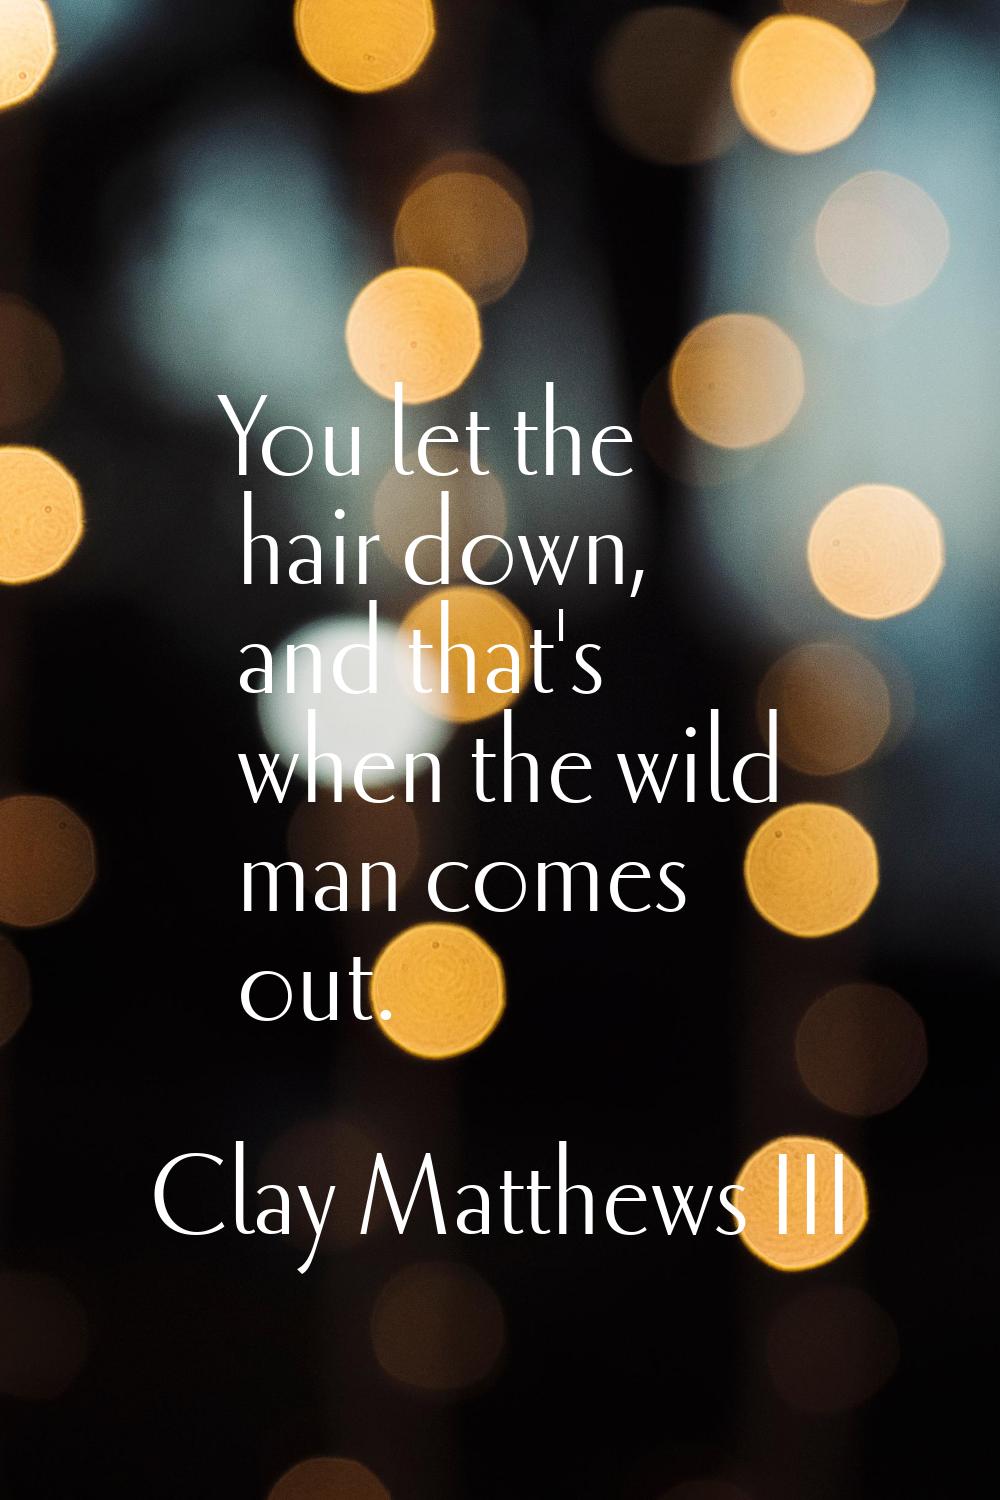 You let the hair down, and that's when the wild man comes out.